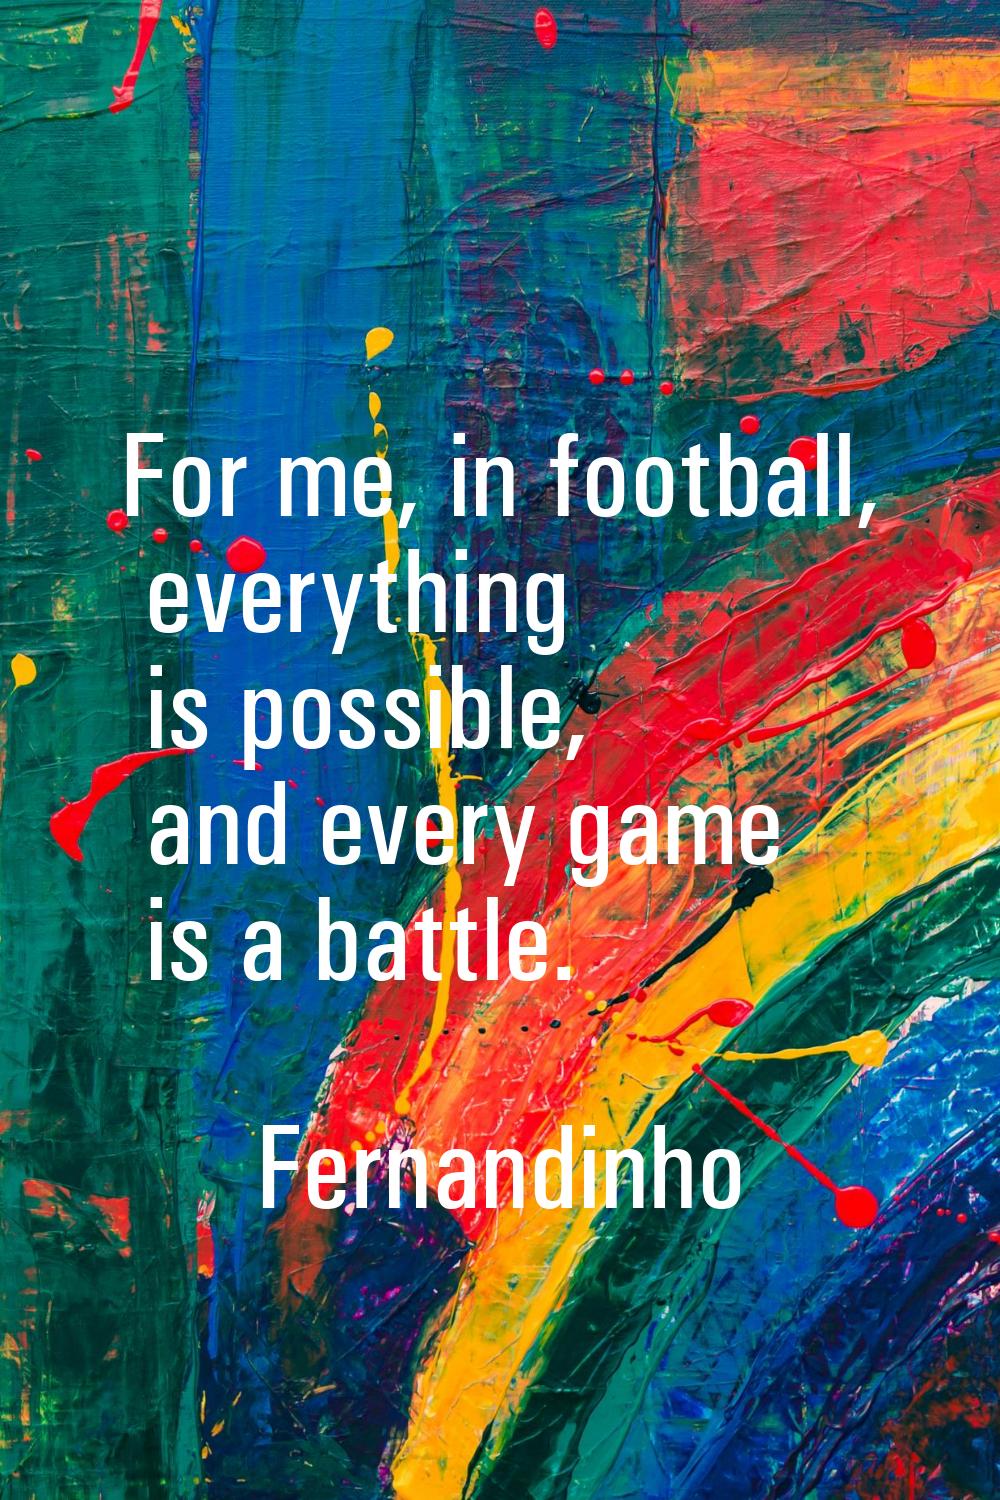 For me, in football, everything is possible, and every game is a battle.